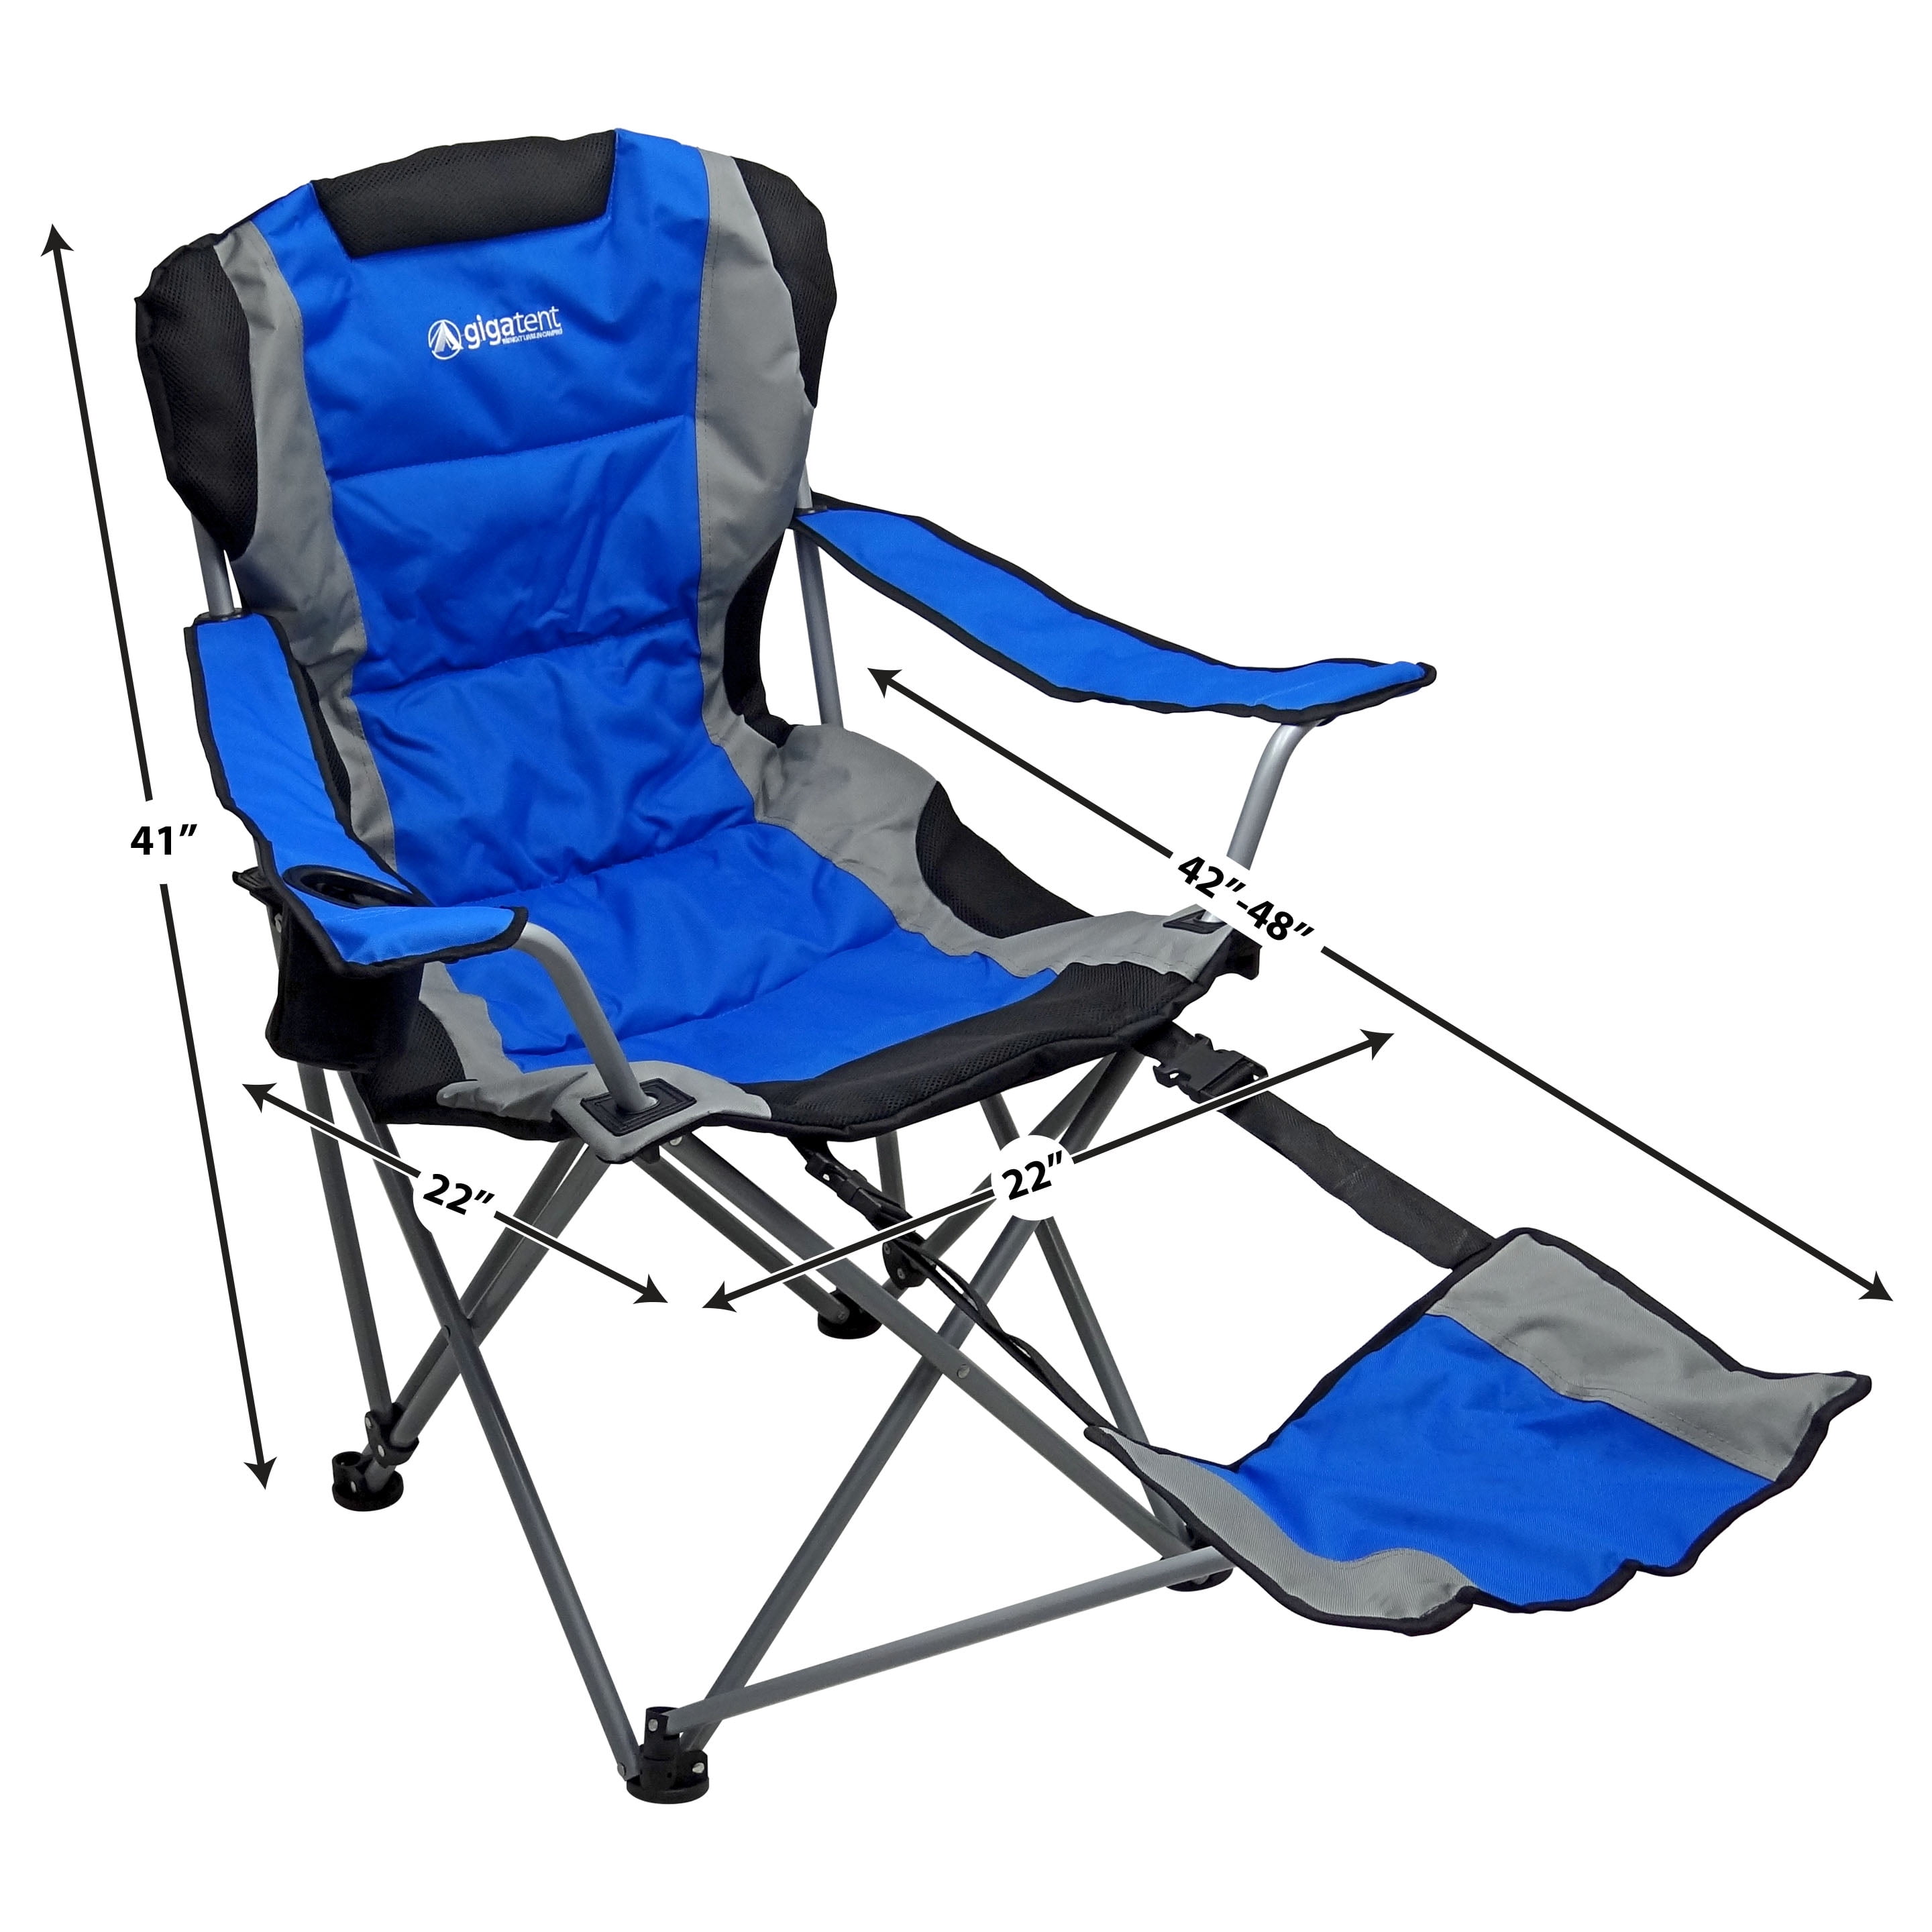 avengers camping chair